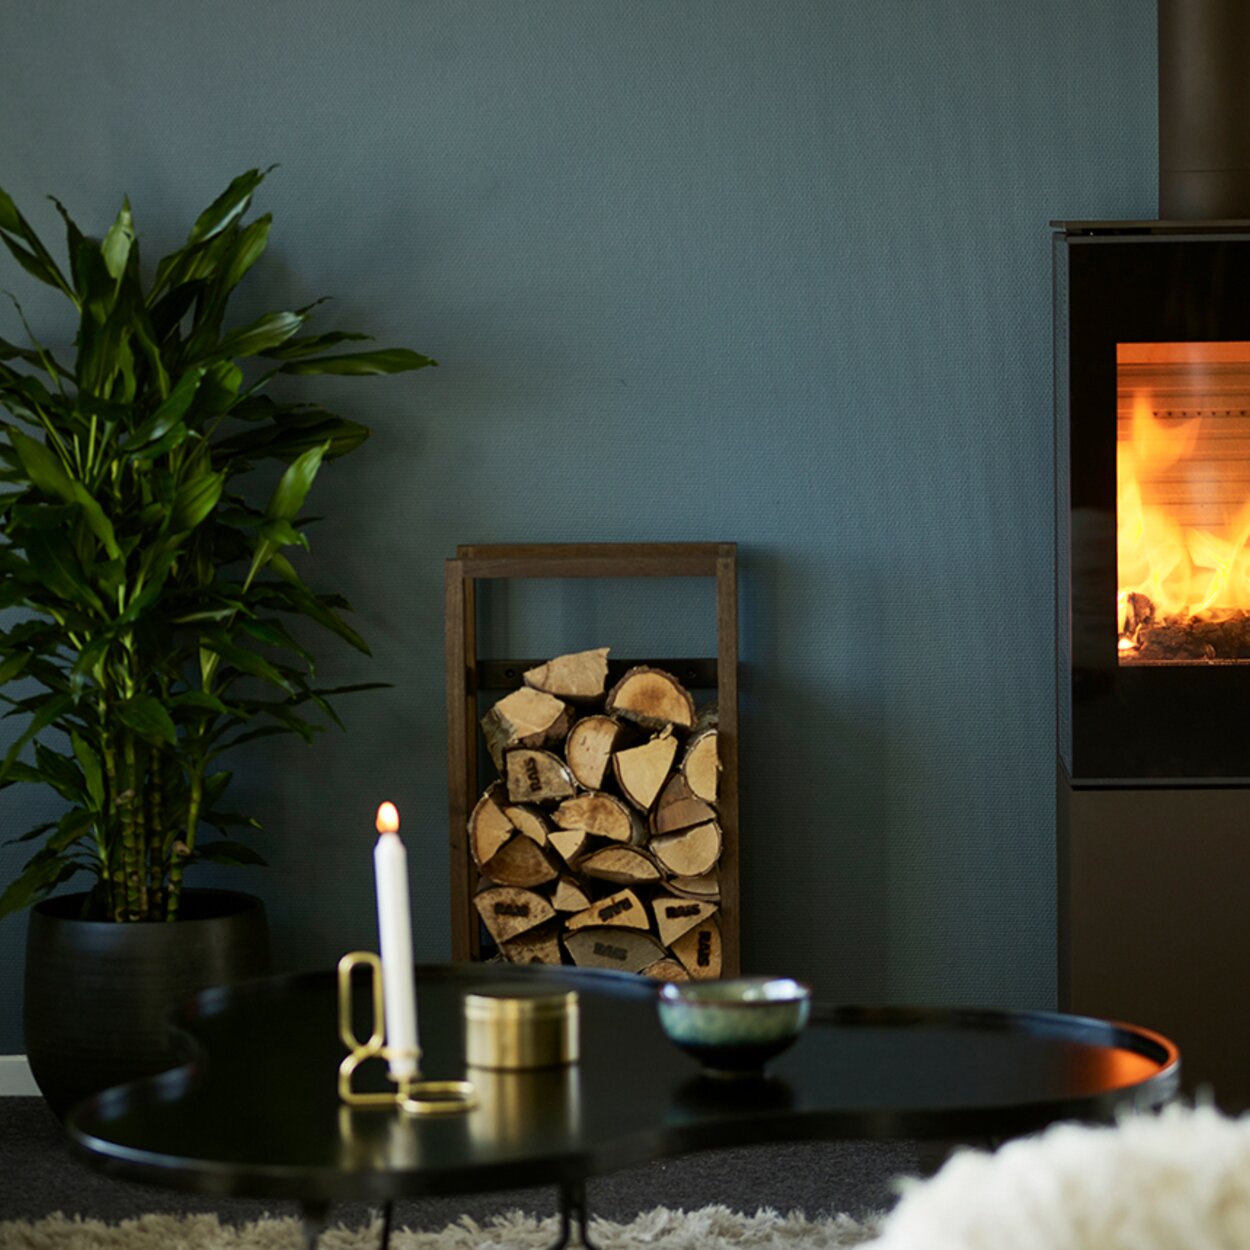 Wood stove NEXO 120 in black with glass door and quiet fire in front of a petrol-coloured wall in a stylish home